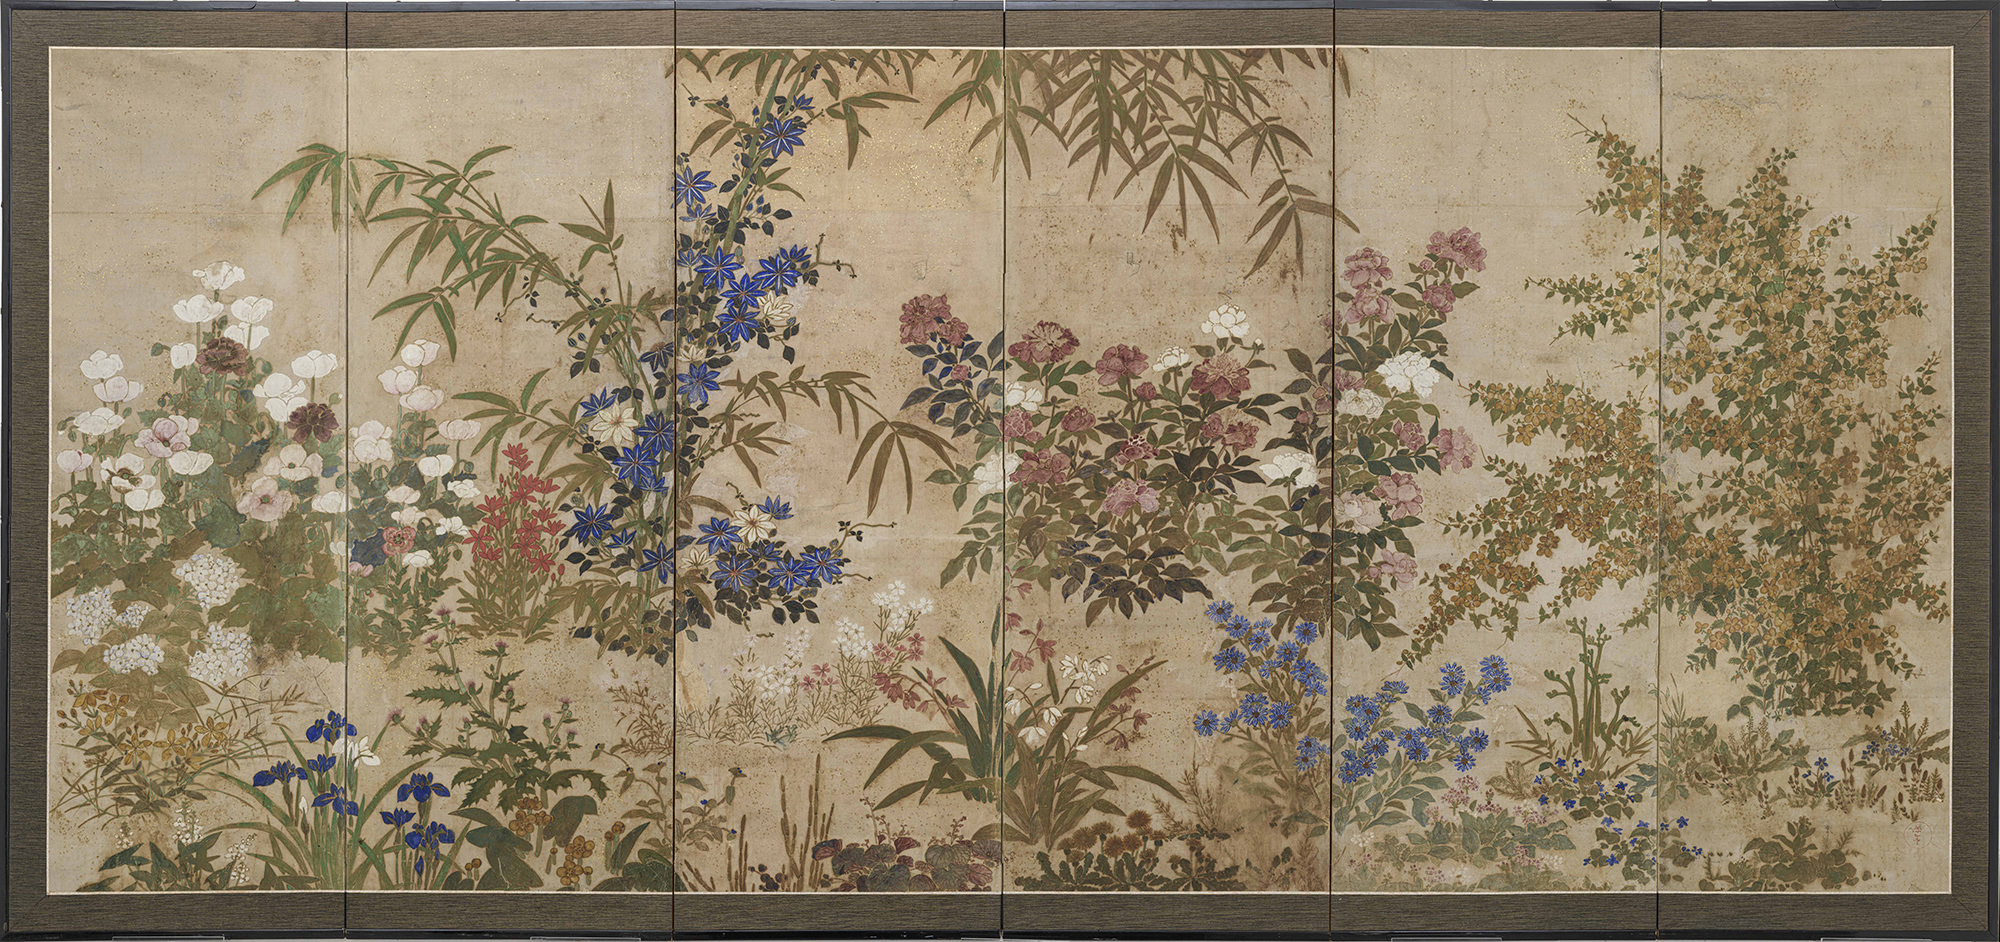 Japanese screens whit flowers